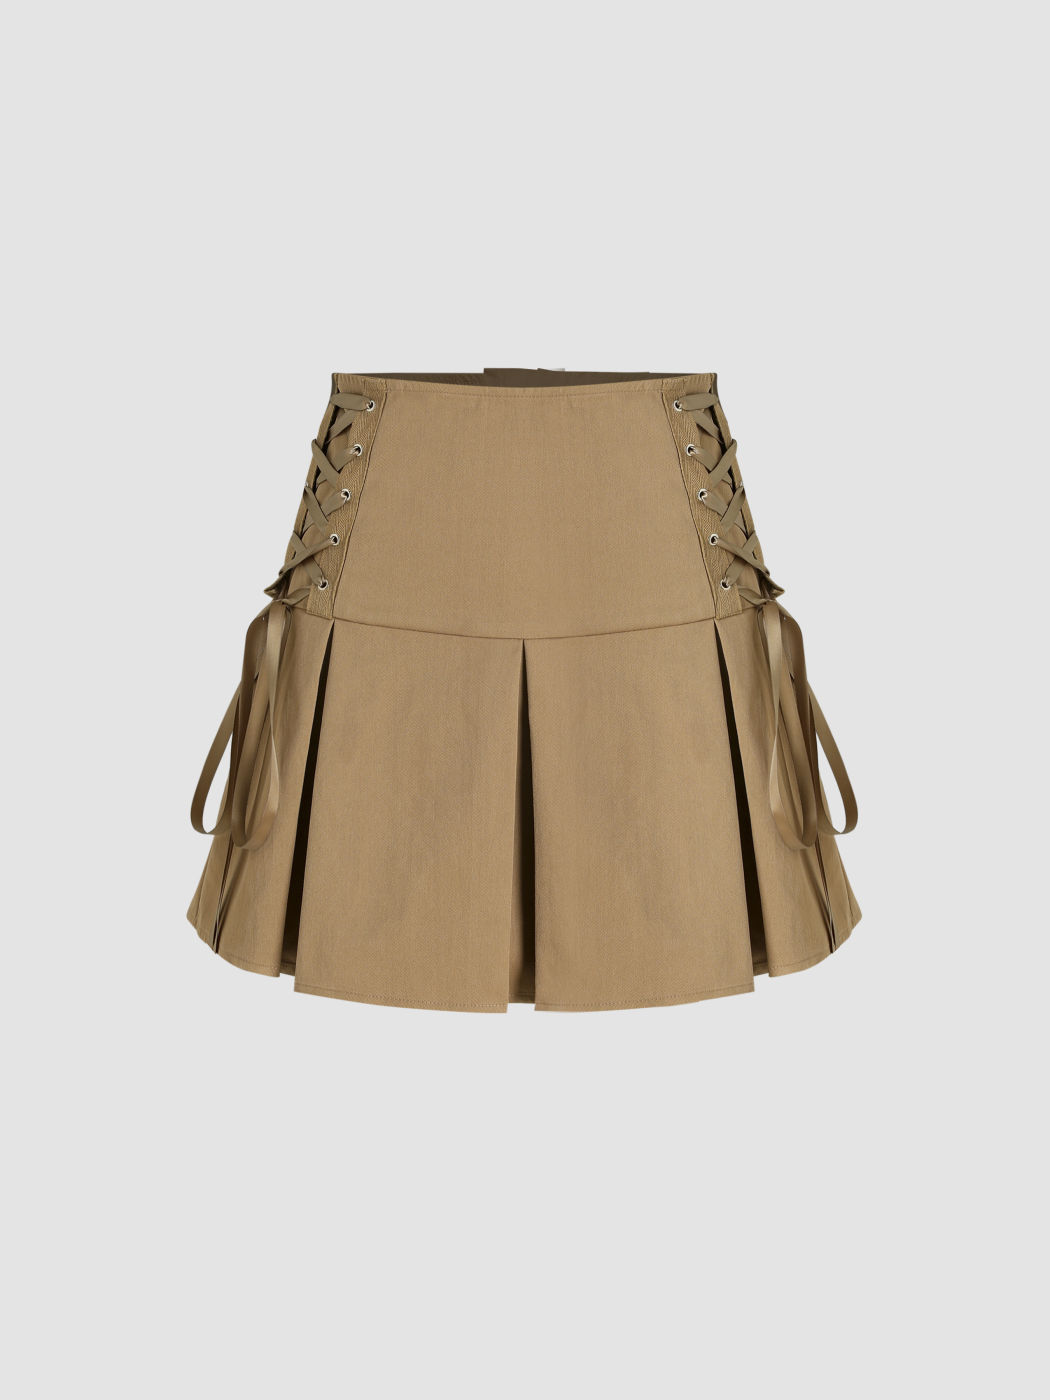 Pleated Lace Up Mini Skirt - Cider